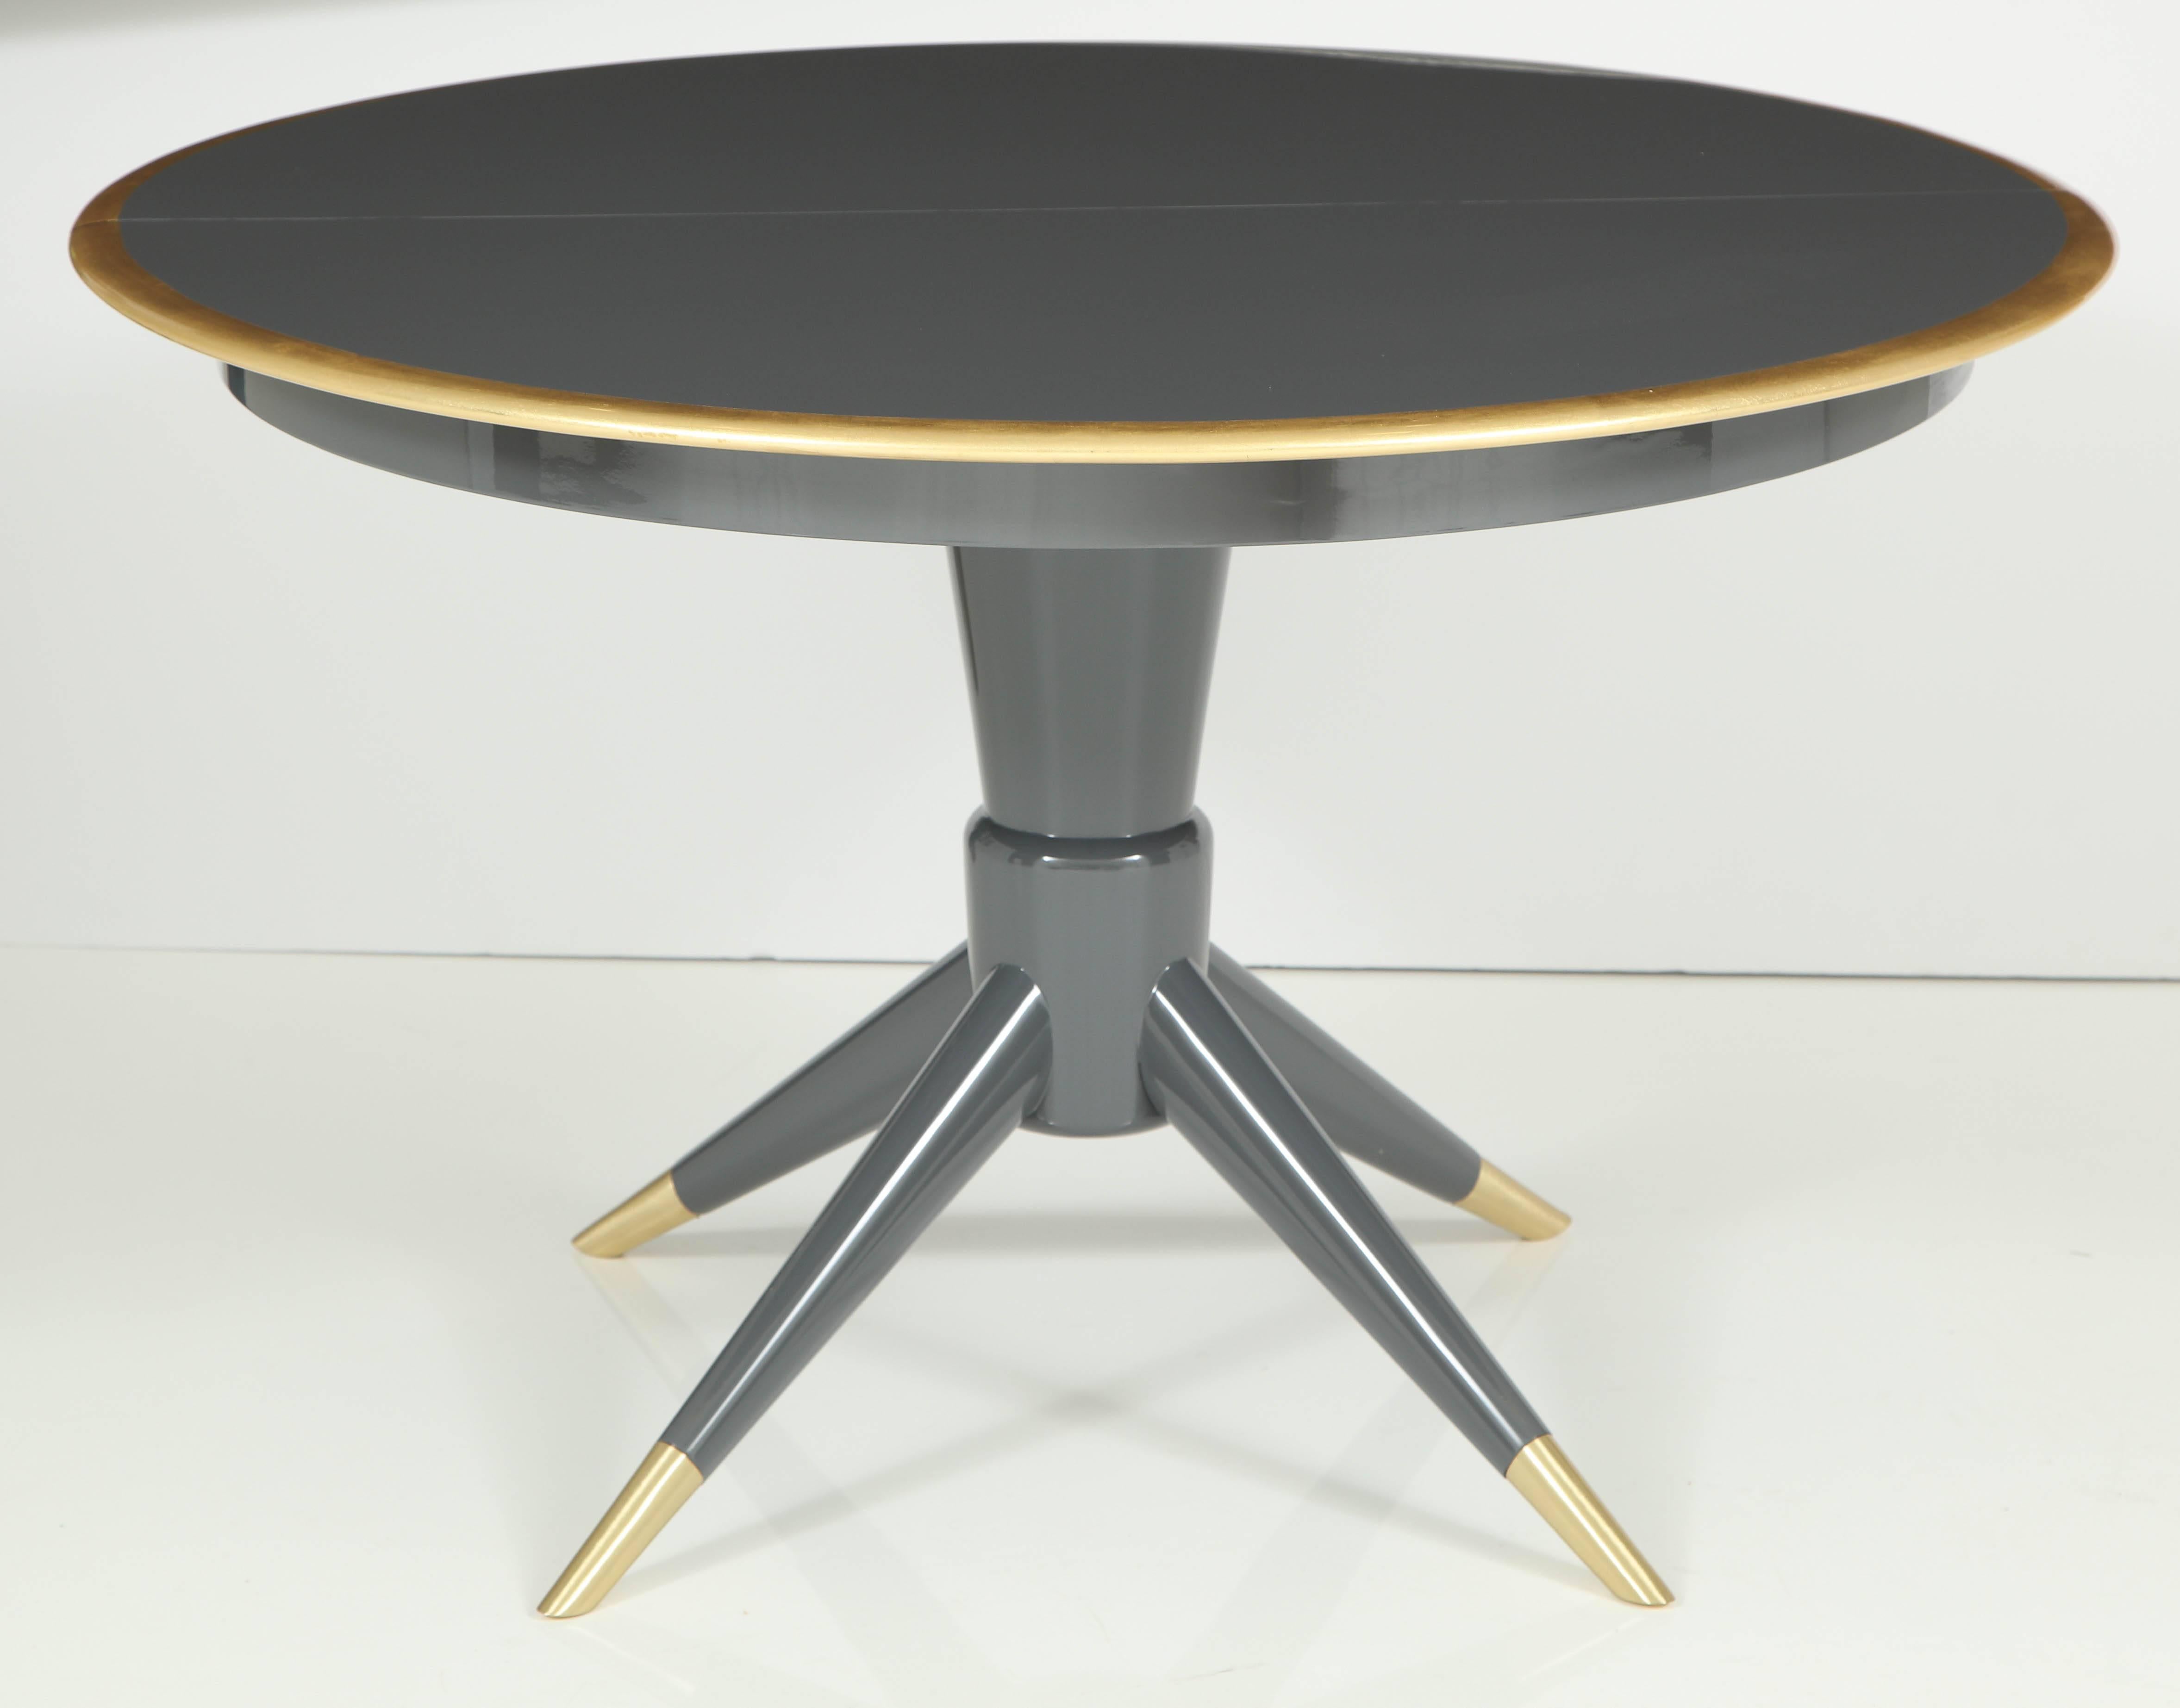 Swedish Modern dining table in a custom medium grey high gloss lacquer (grand piano finish) with a 22-Karat gold leaf band around perimeter. Each leaf is 14 inches wide. Pedestal table has four flared tapering legs finished in satin brass sabots.